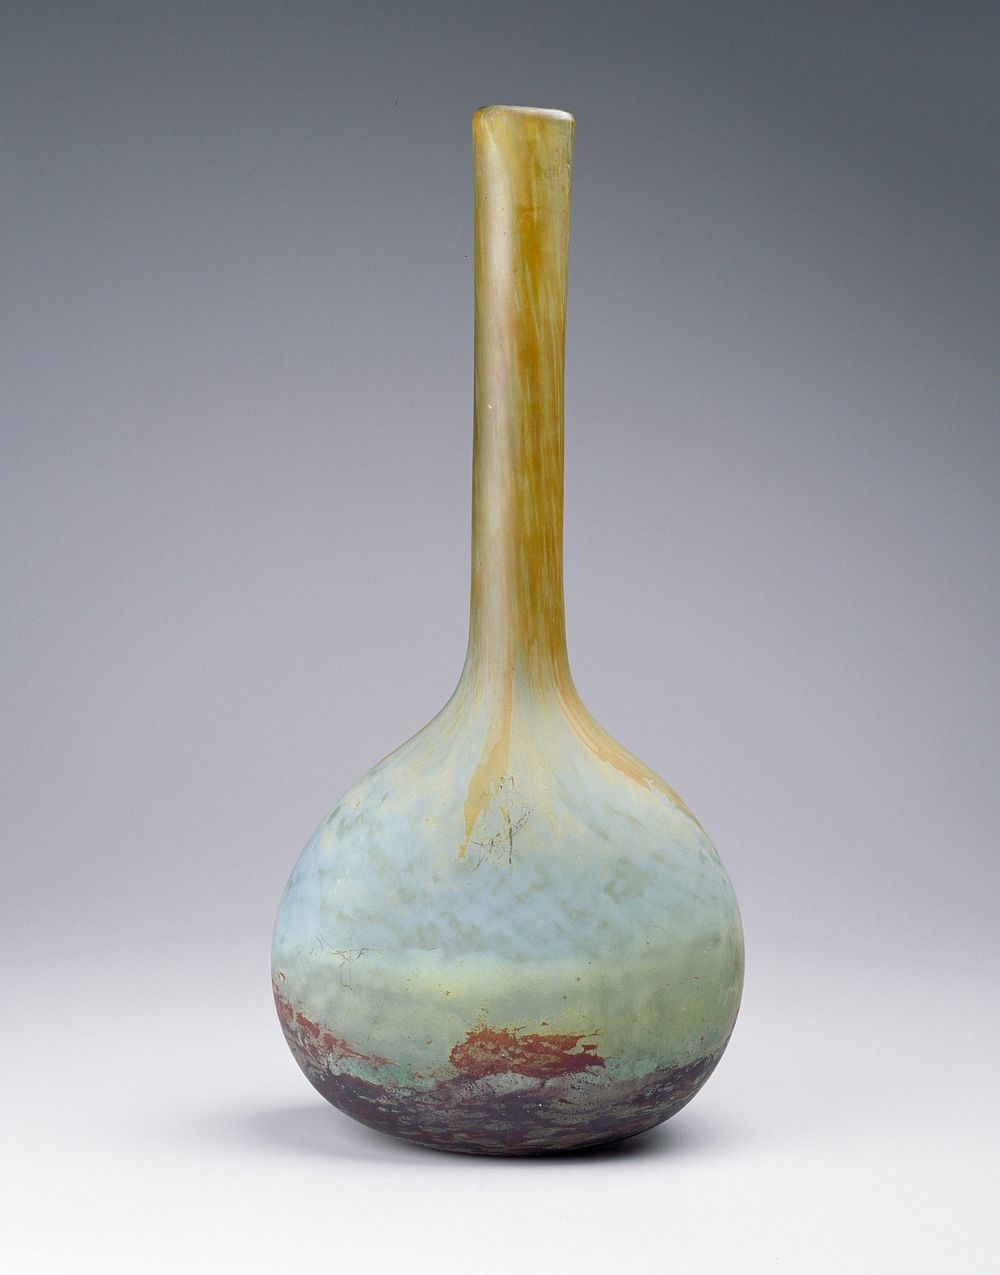 Glass vase with lozenge-shaped vase and long, slightly flaring neck; green, yellow and brown glass with acid etching;…